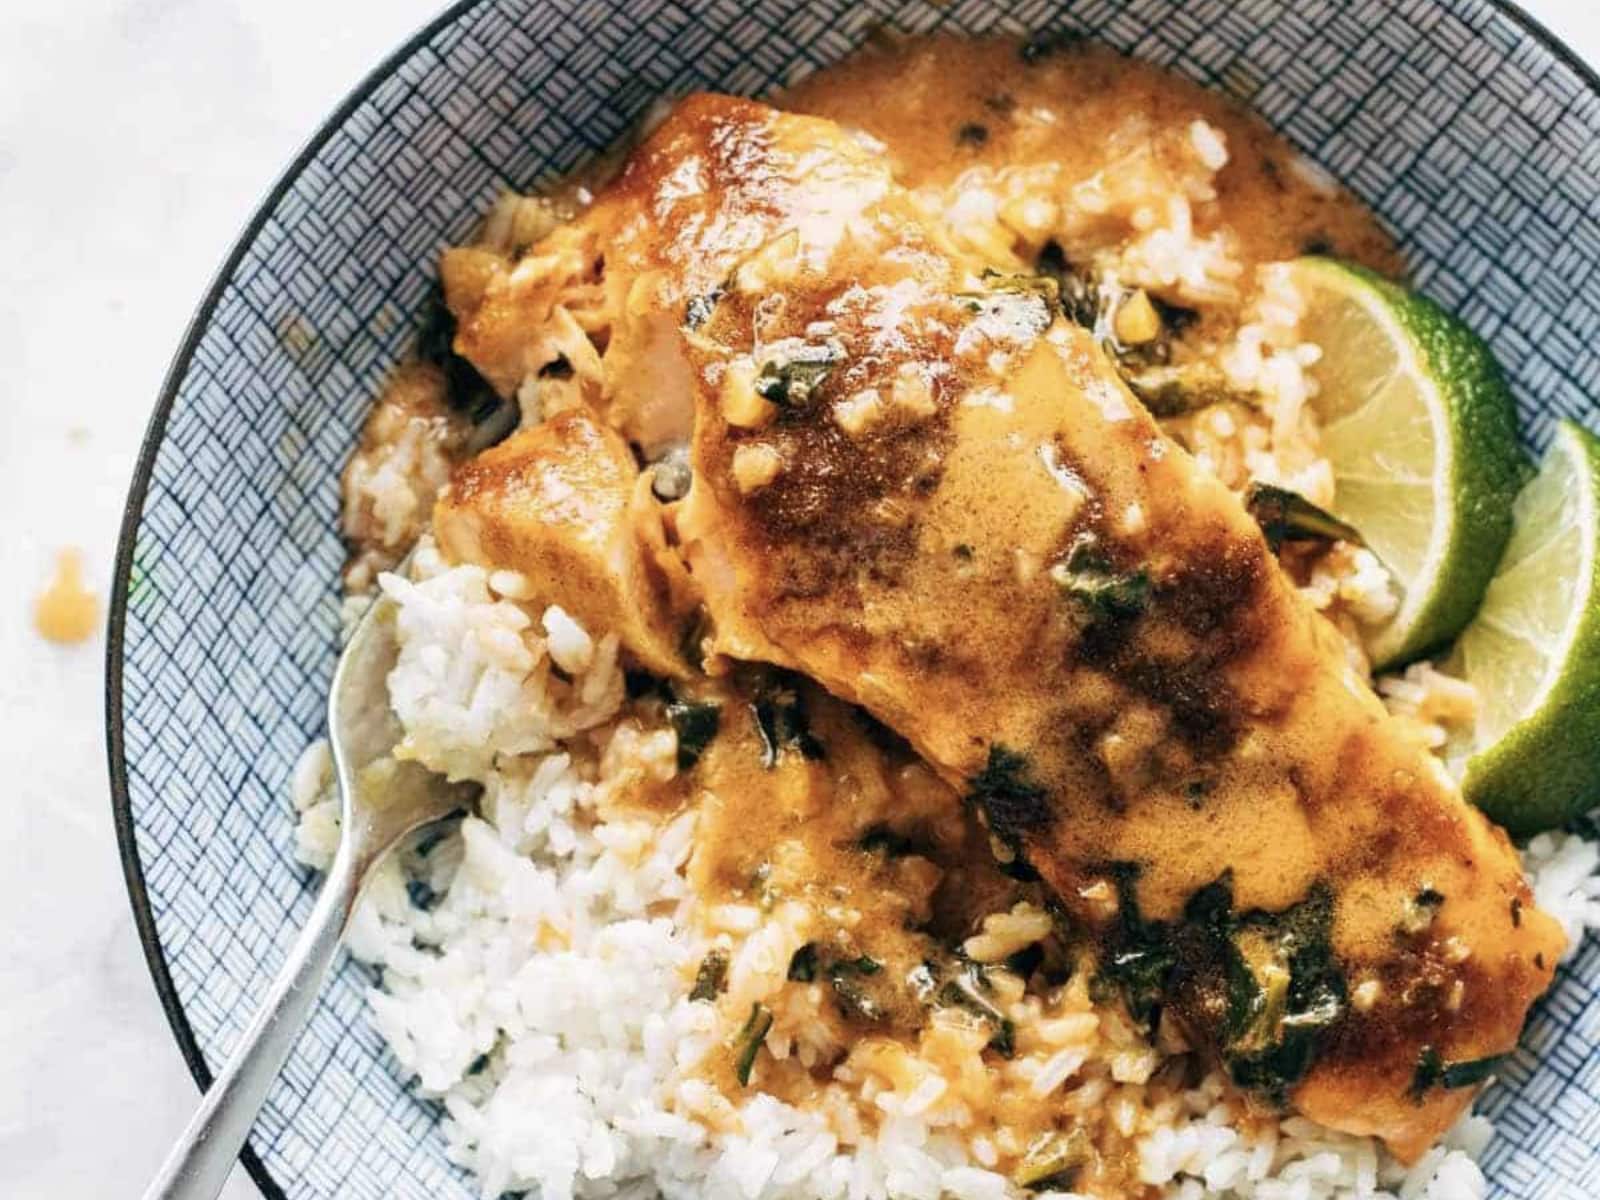 coconut curry salmon in a bowl with rice and limes